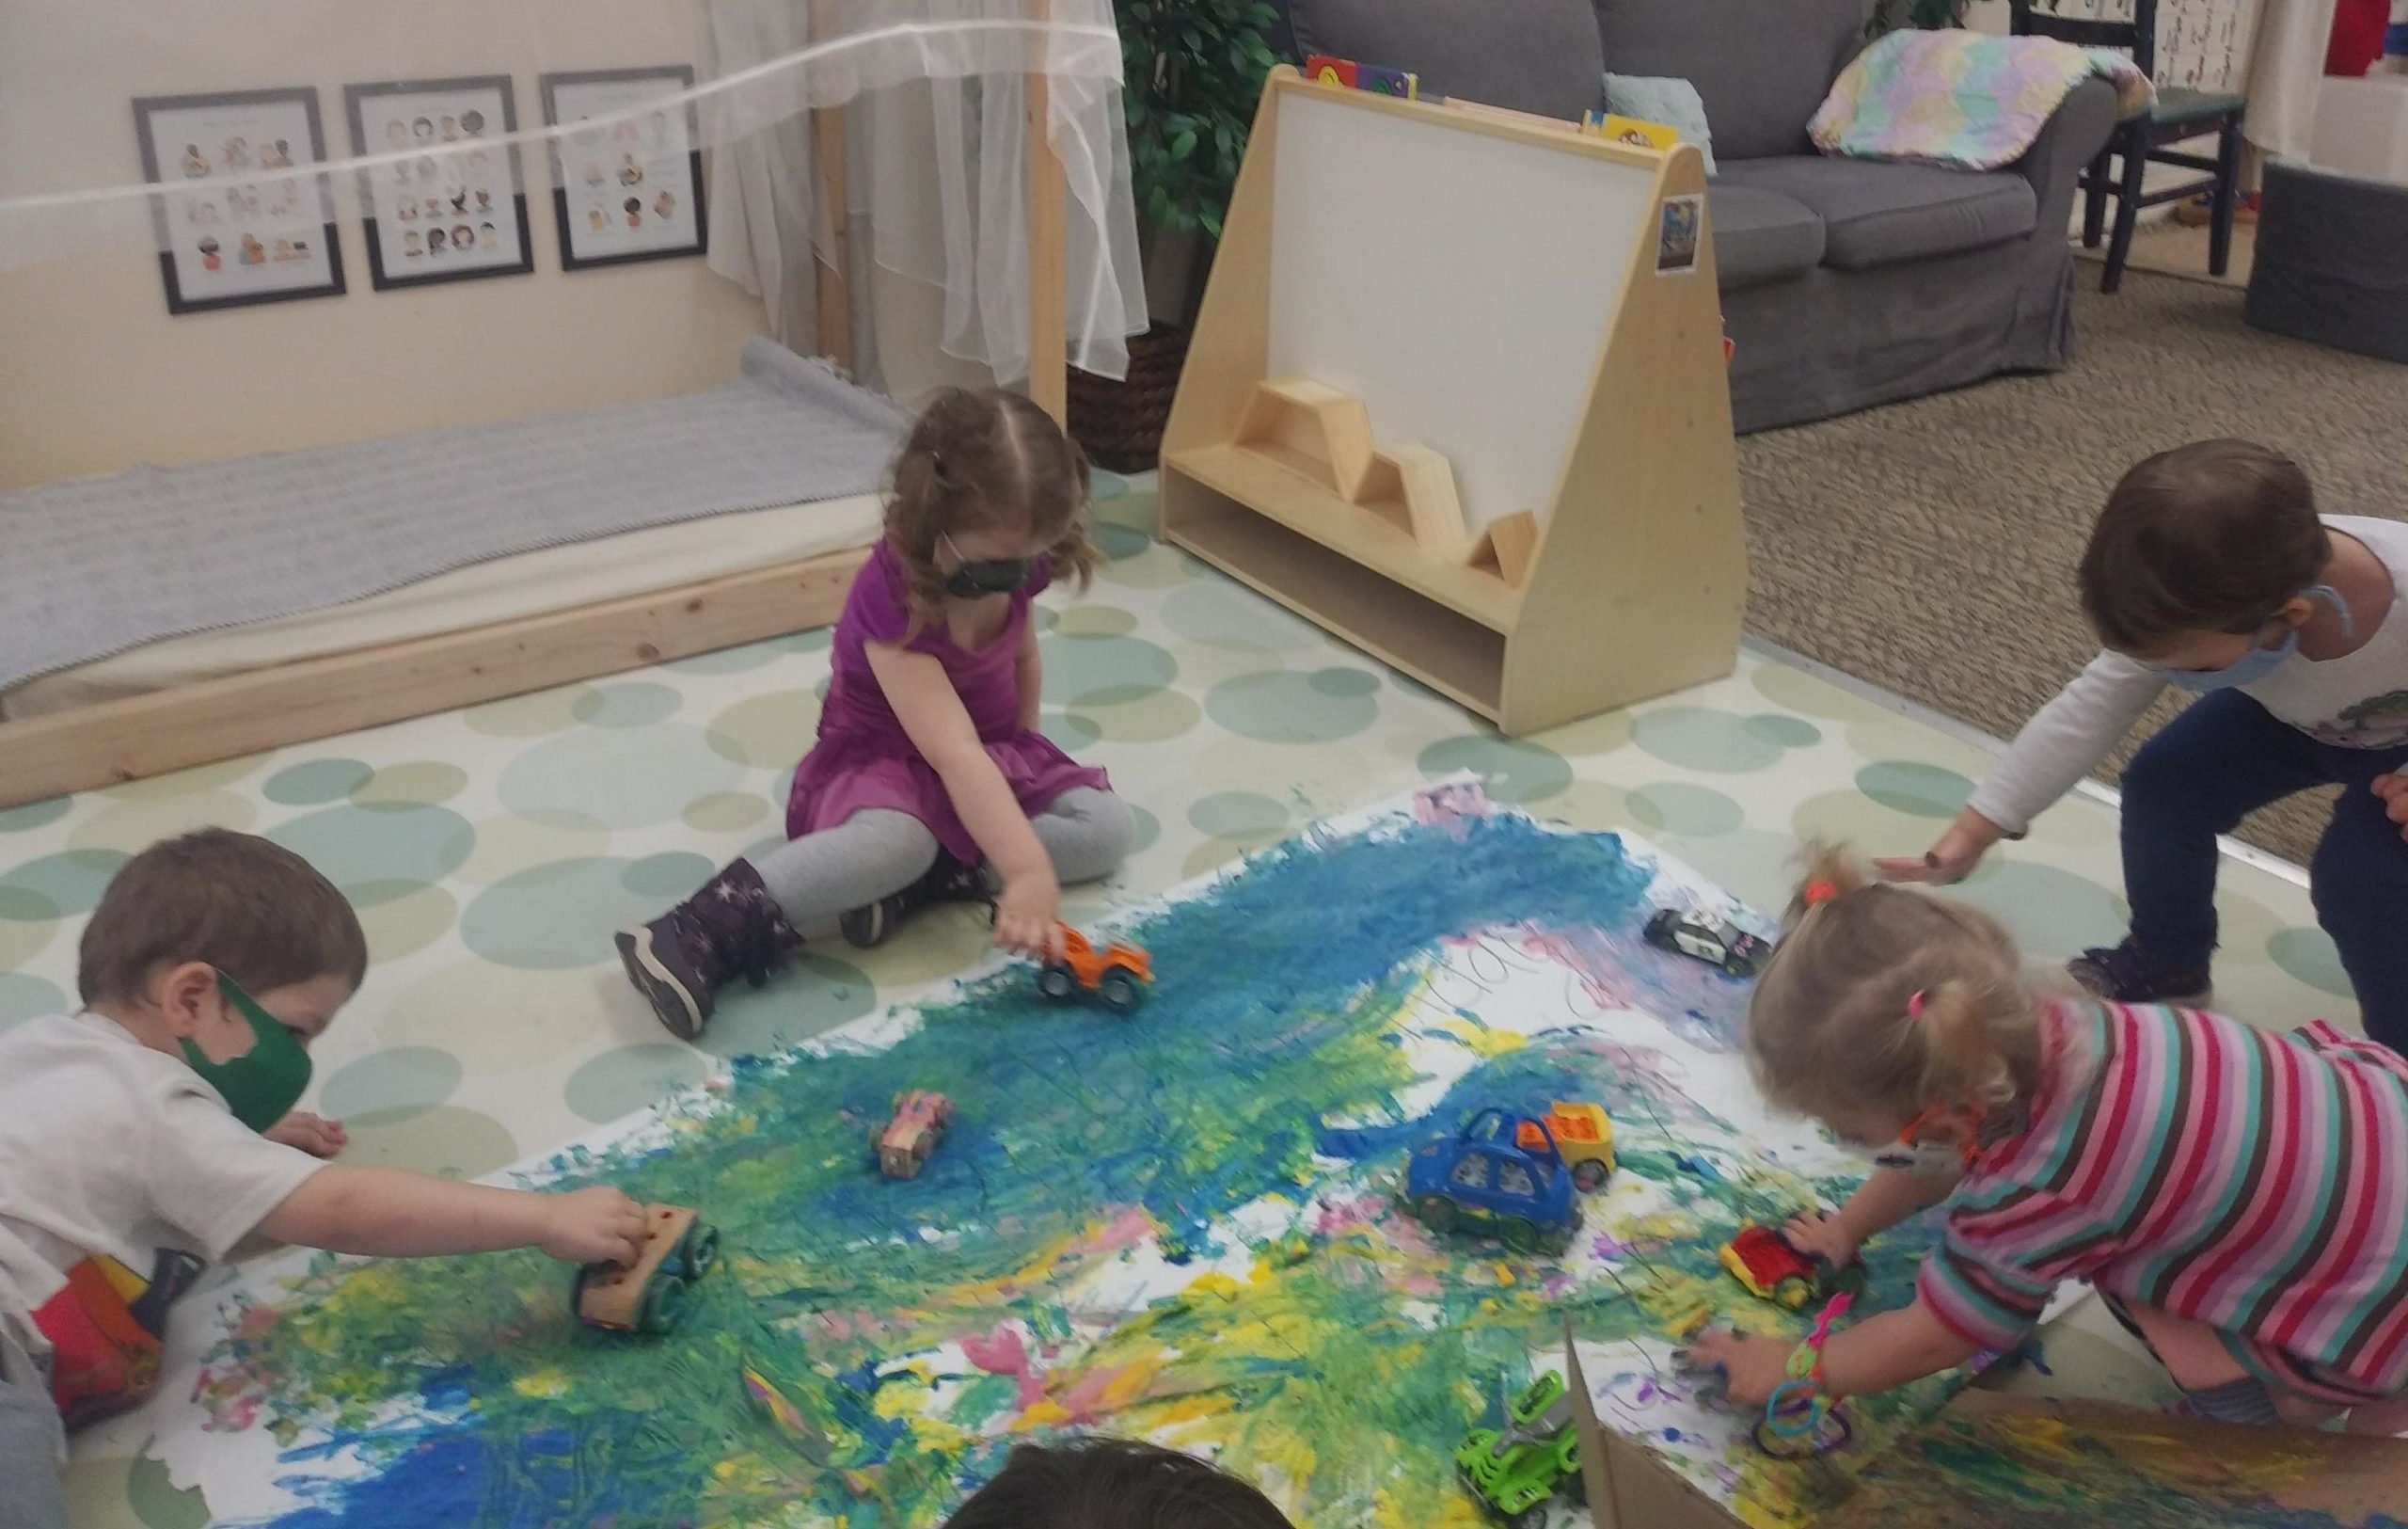 Children drive toy cars through blue and yellow paint, making the color green. In the background is a quiet space and a shelf with books and a white board.